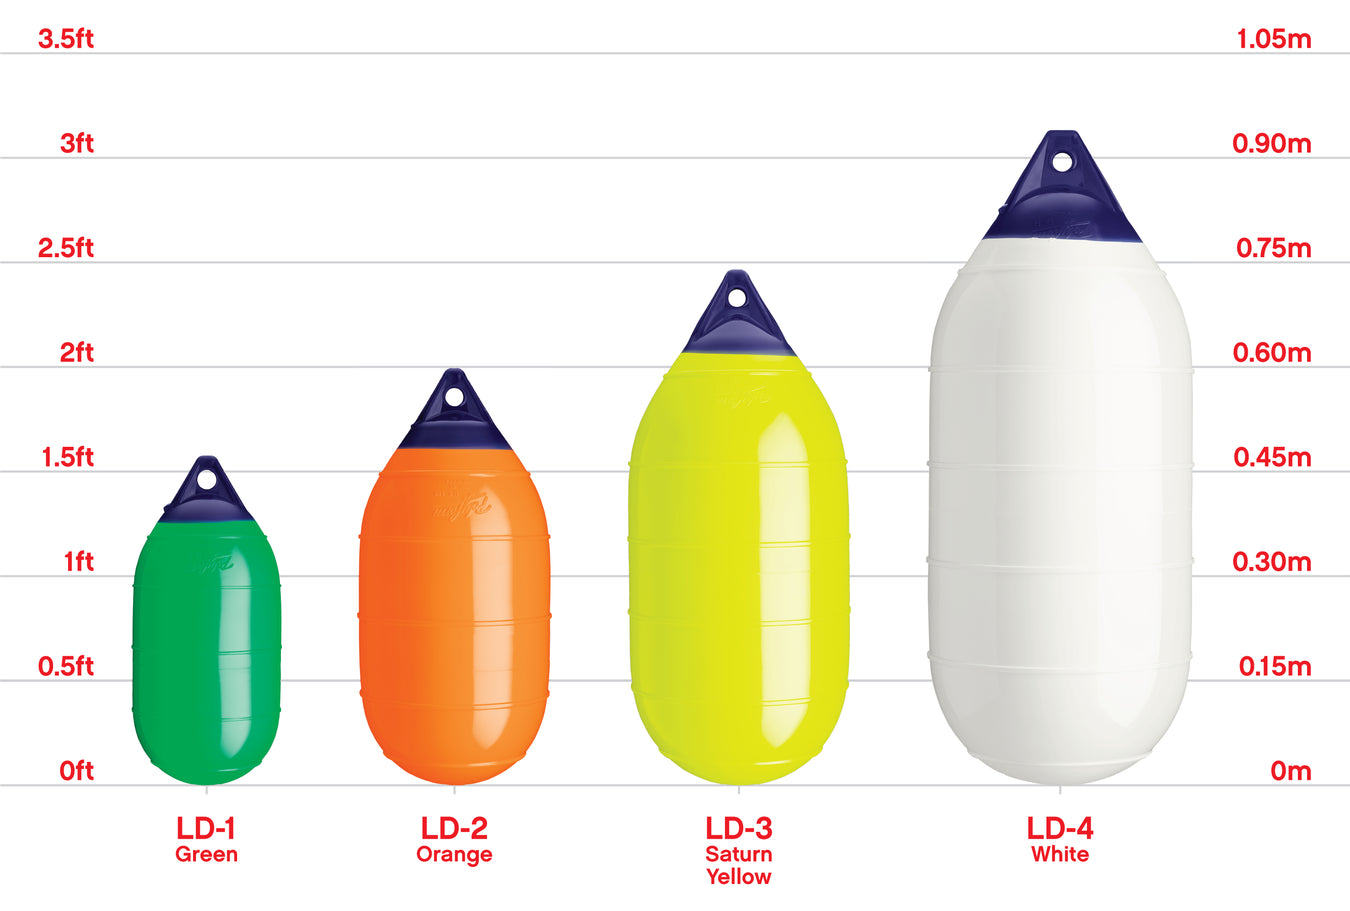 chart showing sizes of Polyform US LD-Series buoys and boat fenders